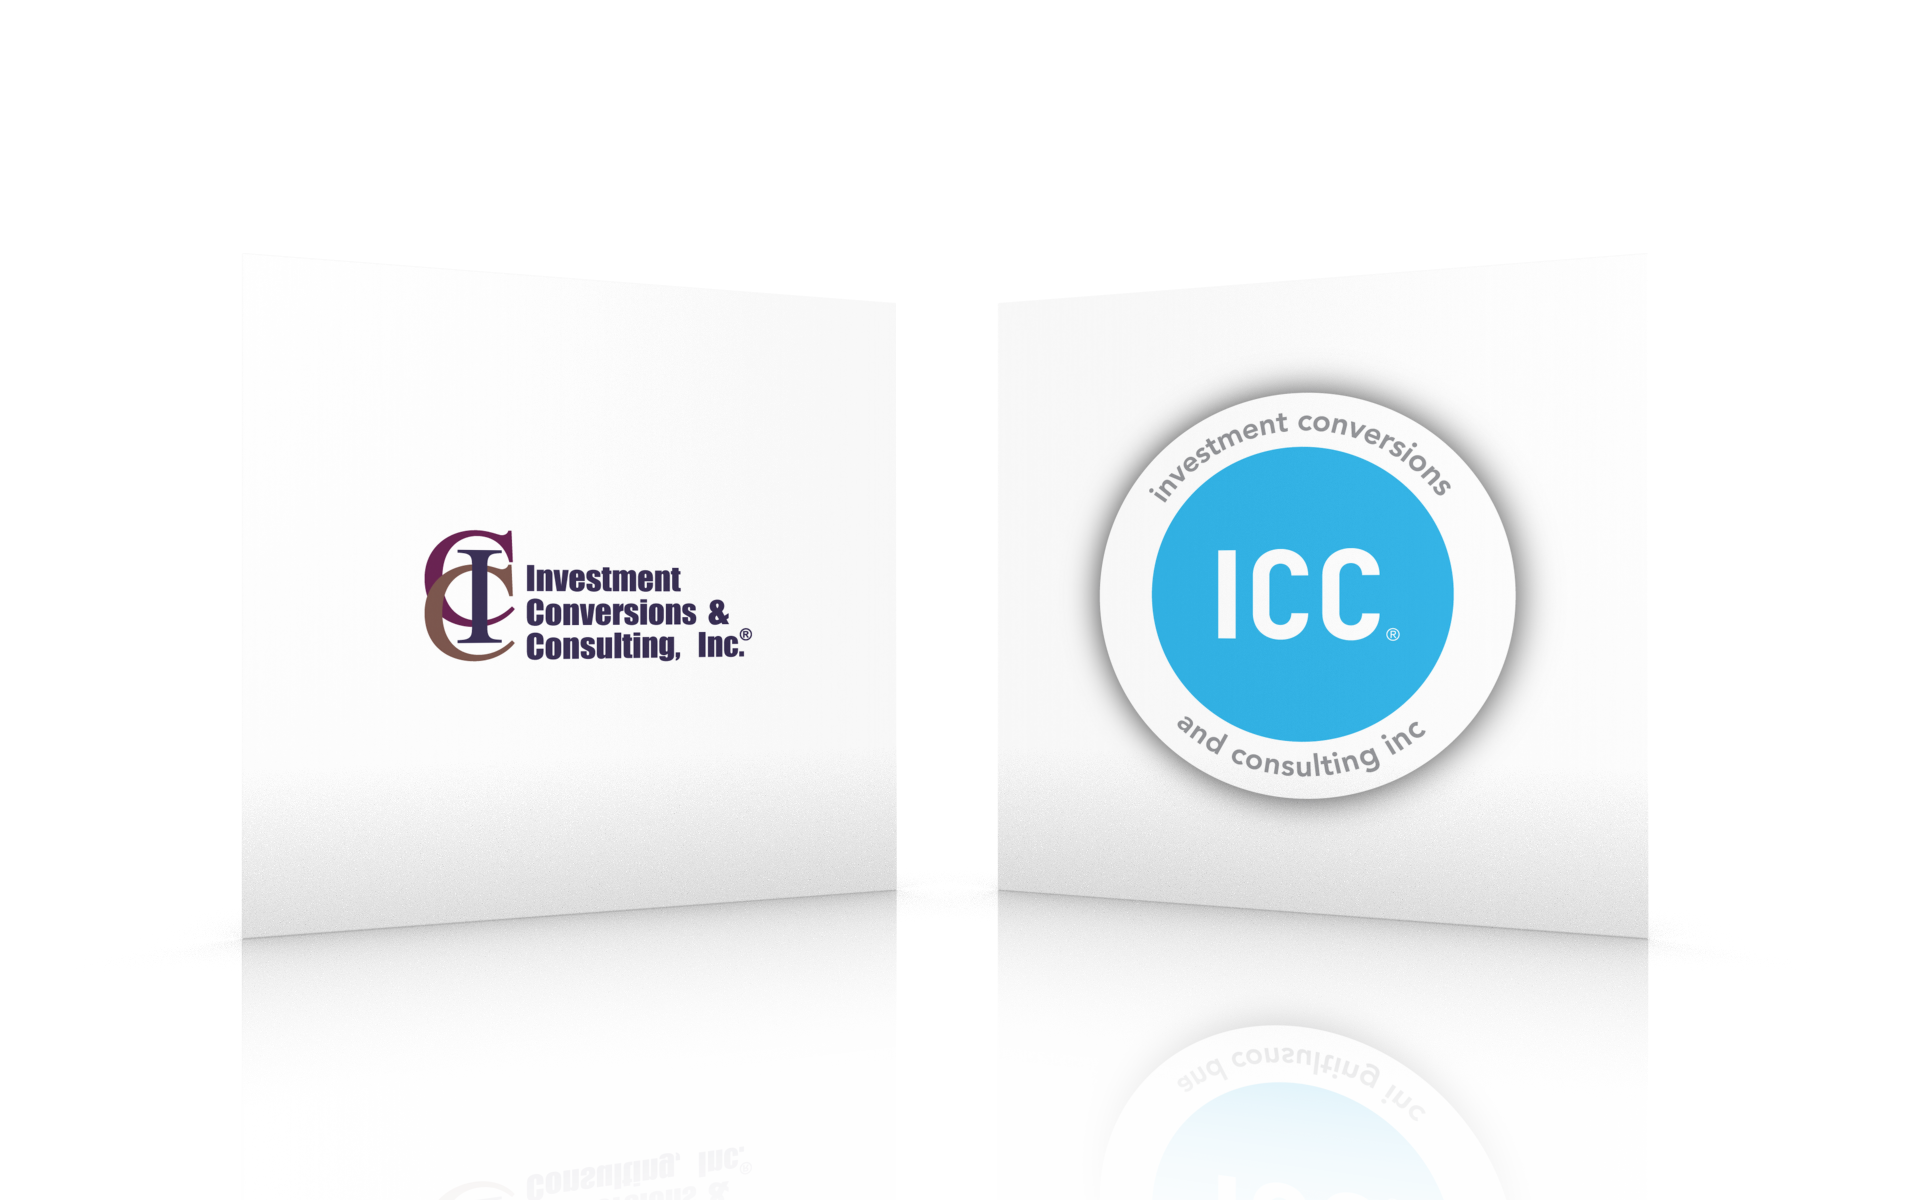 ICC Identity: Before and After